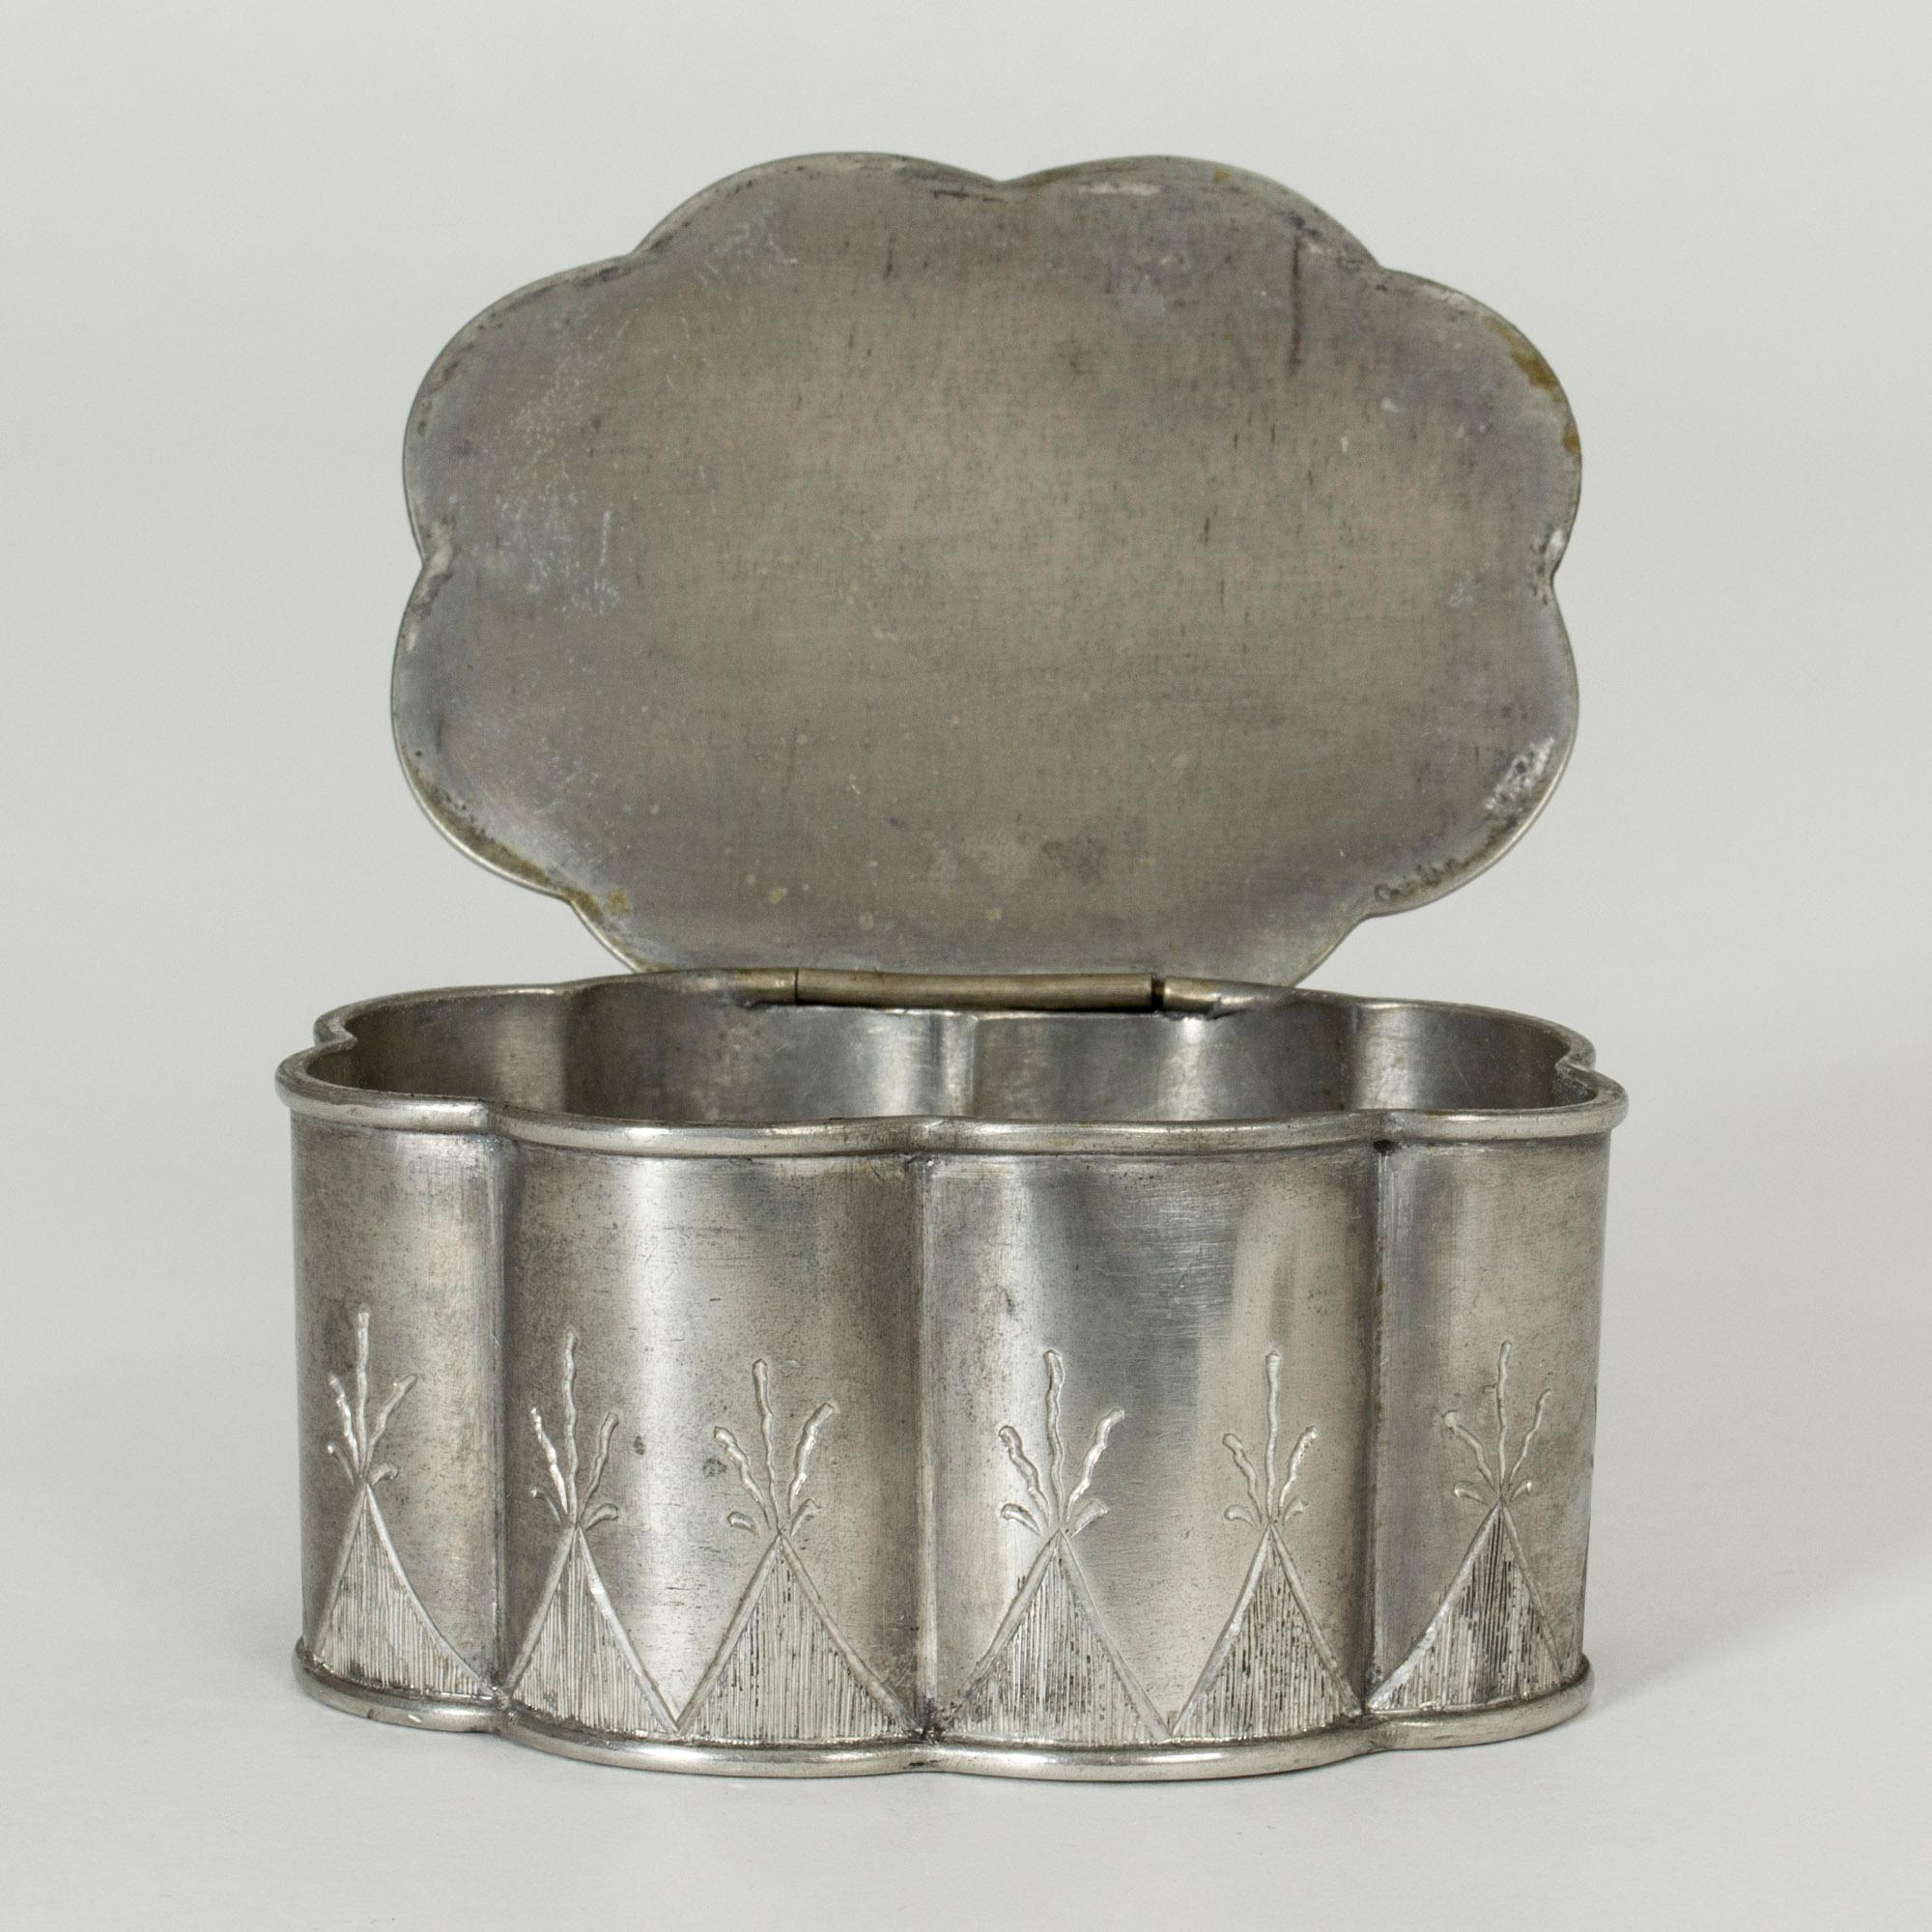 Lovely pewter box from Herman Bergman, in oval shape with a scalloped silhouette. Pretty etched pattern on the lid and around the base.